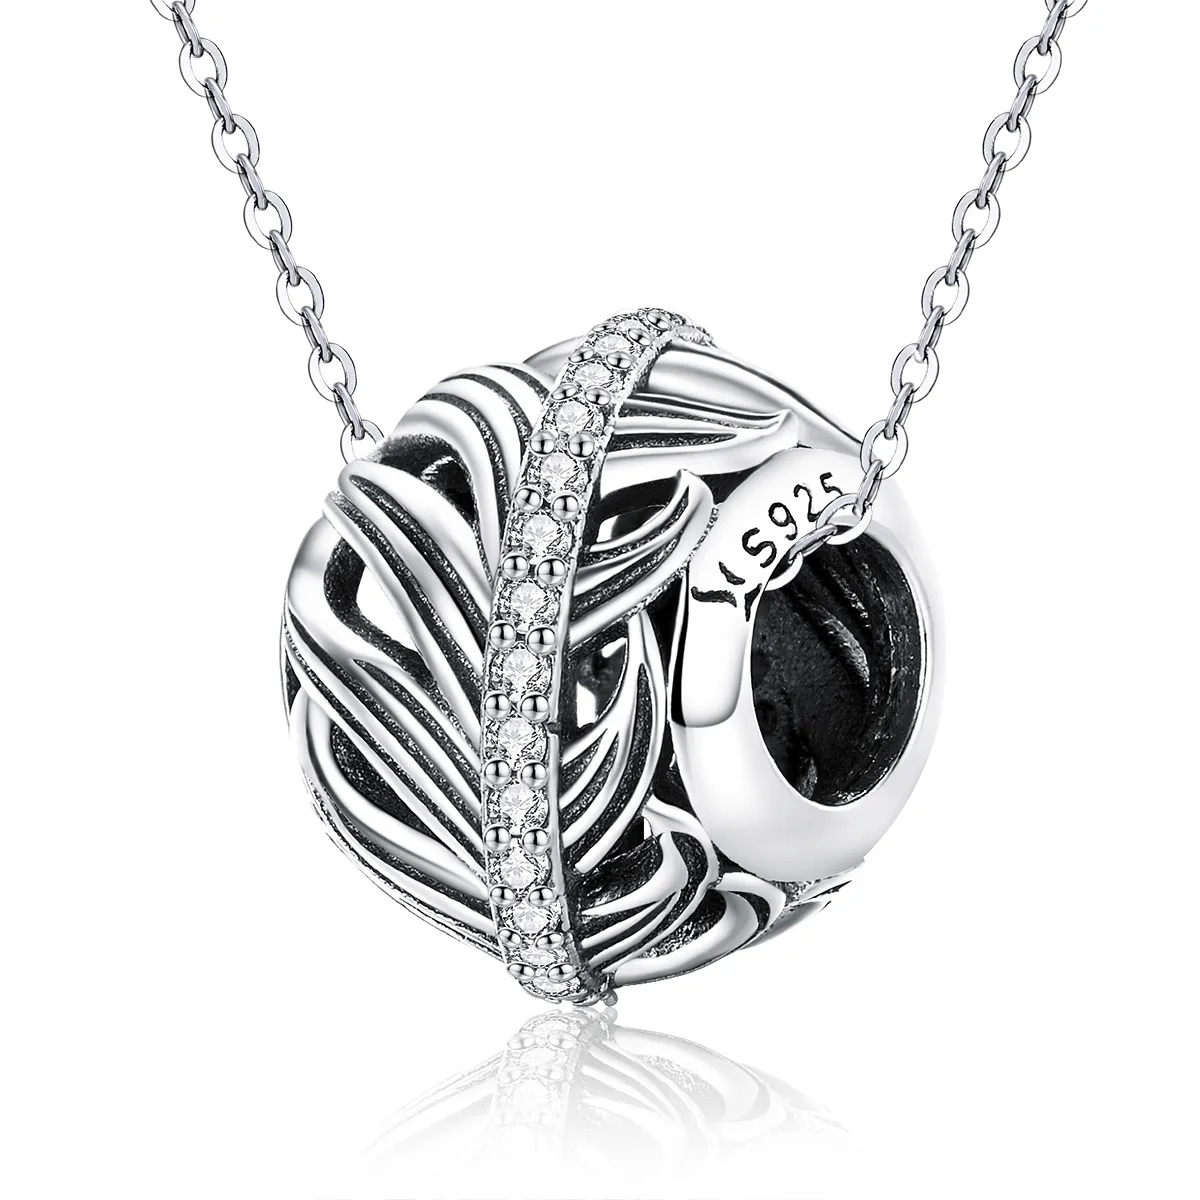 Pandora Style Silver Gently Love Charm - SCC1065